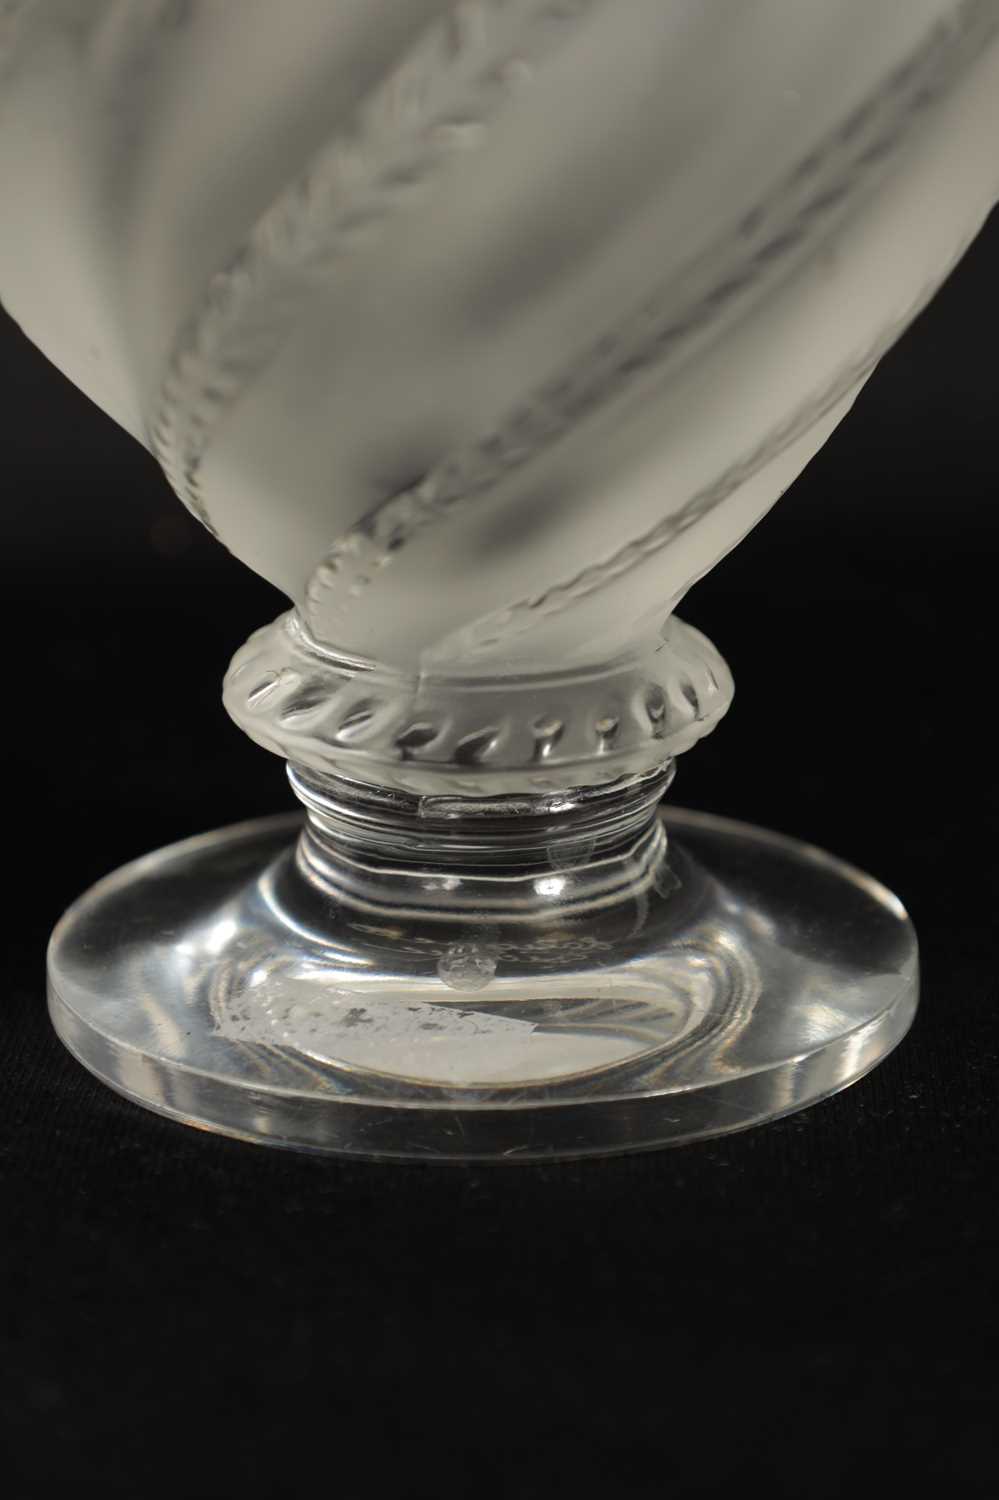 A PAIR OF LALIQUE FROSTED AND CLEAR GLASS “ERMENONVILLE” VASES - Image 5 of 12